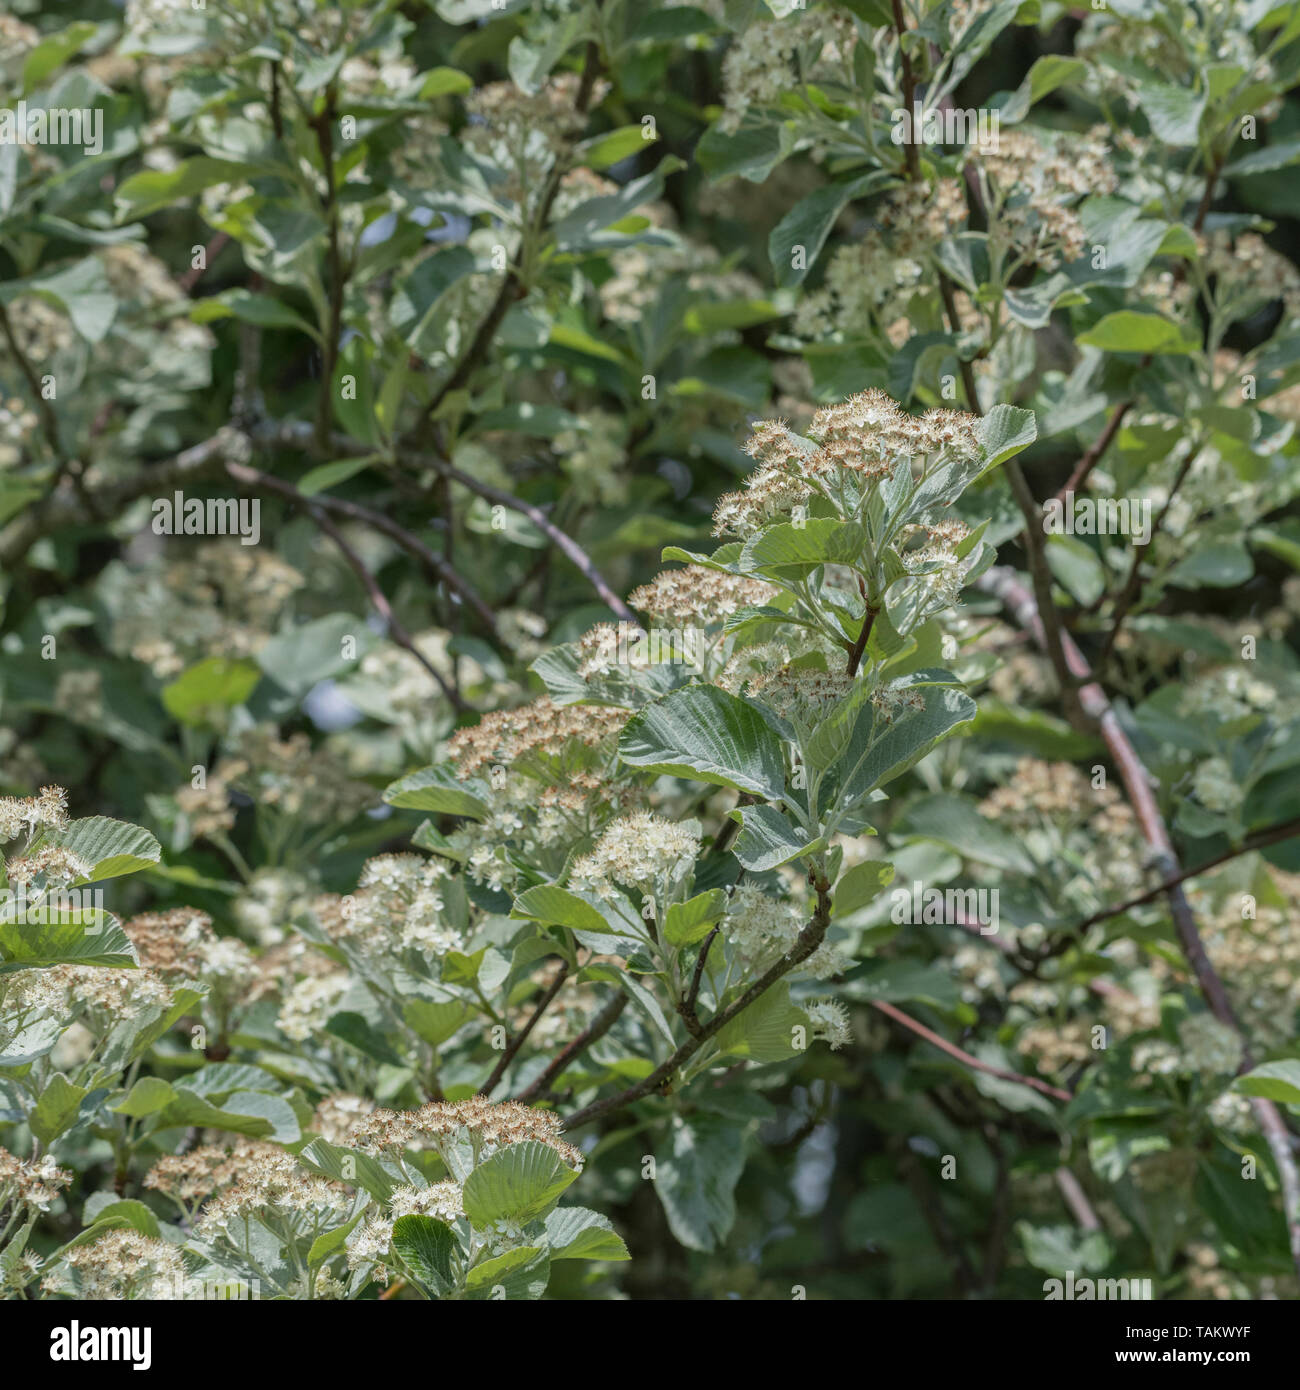 Leaves foliage & white flowers blossom of Whitebeam / Sorbus aria (tho. may be a variety). Medicinal plant Whitebeam once used in herbal remedies. Stock Photo